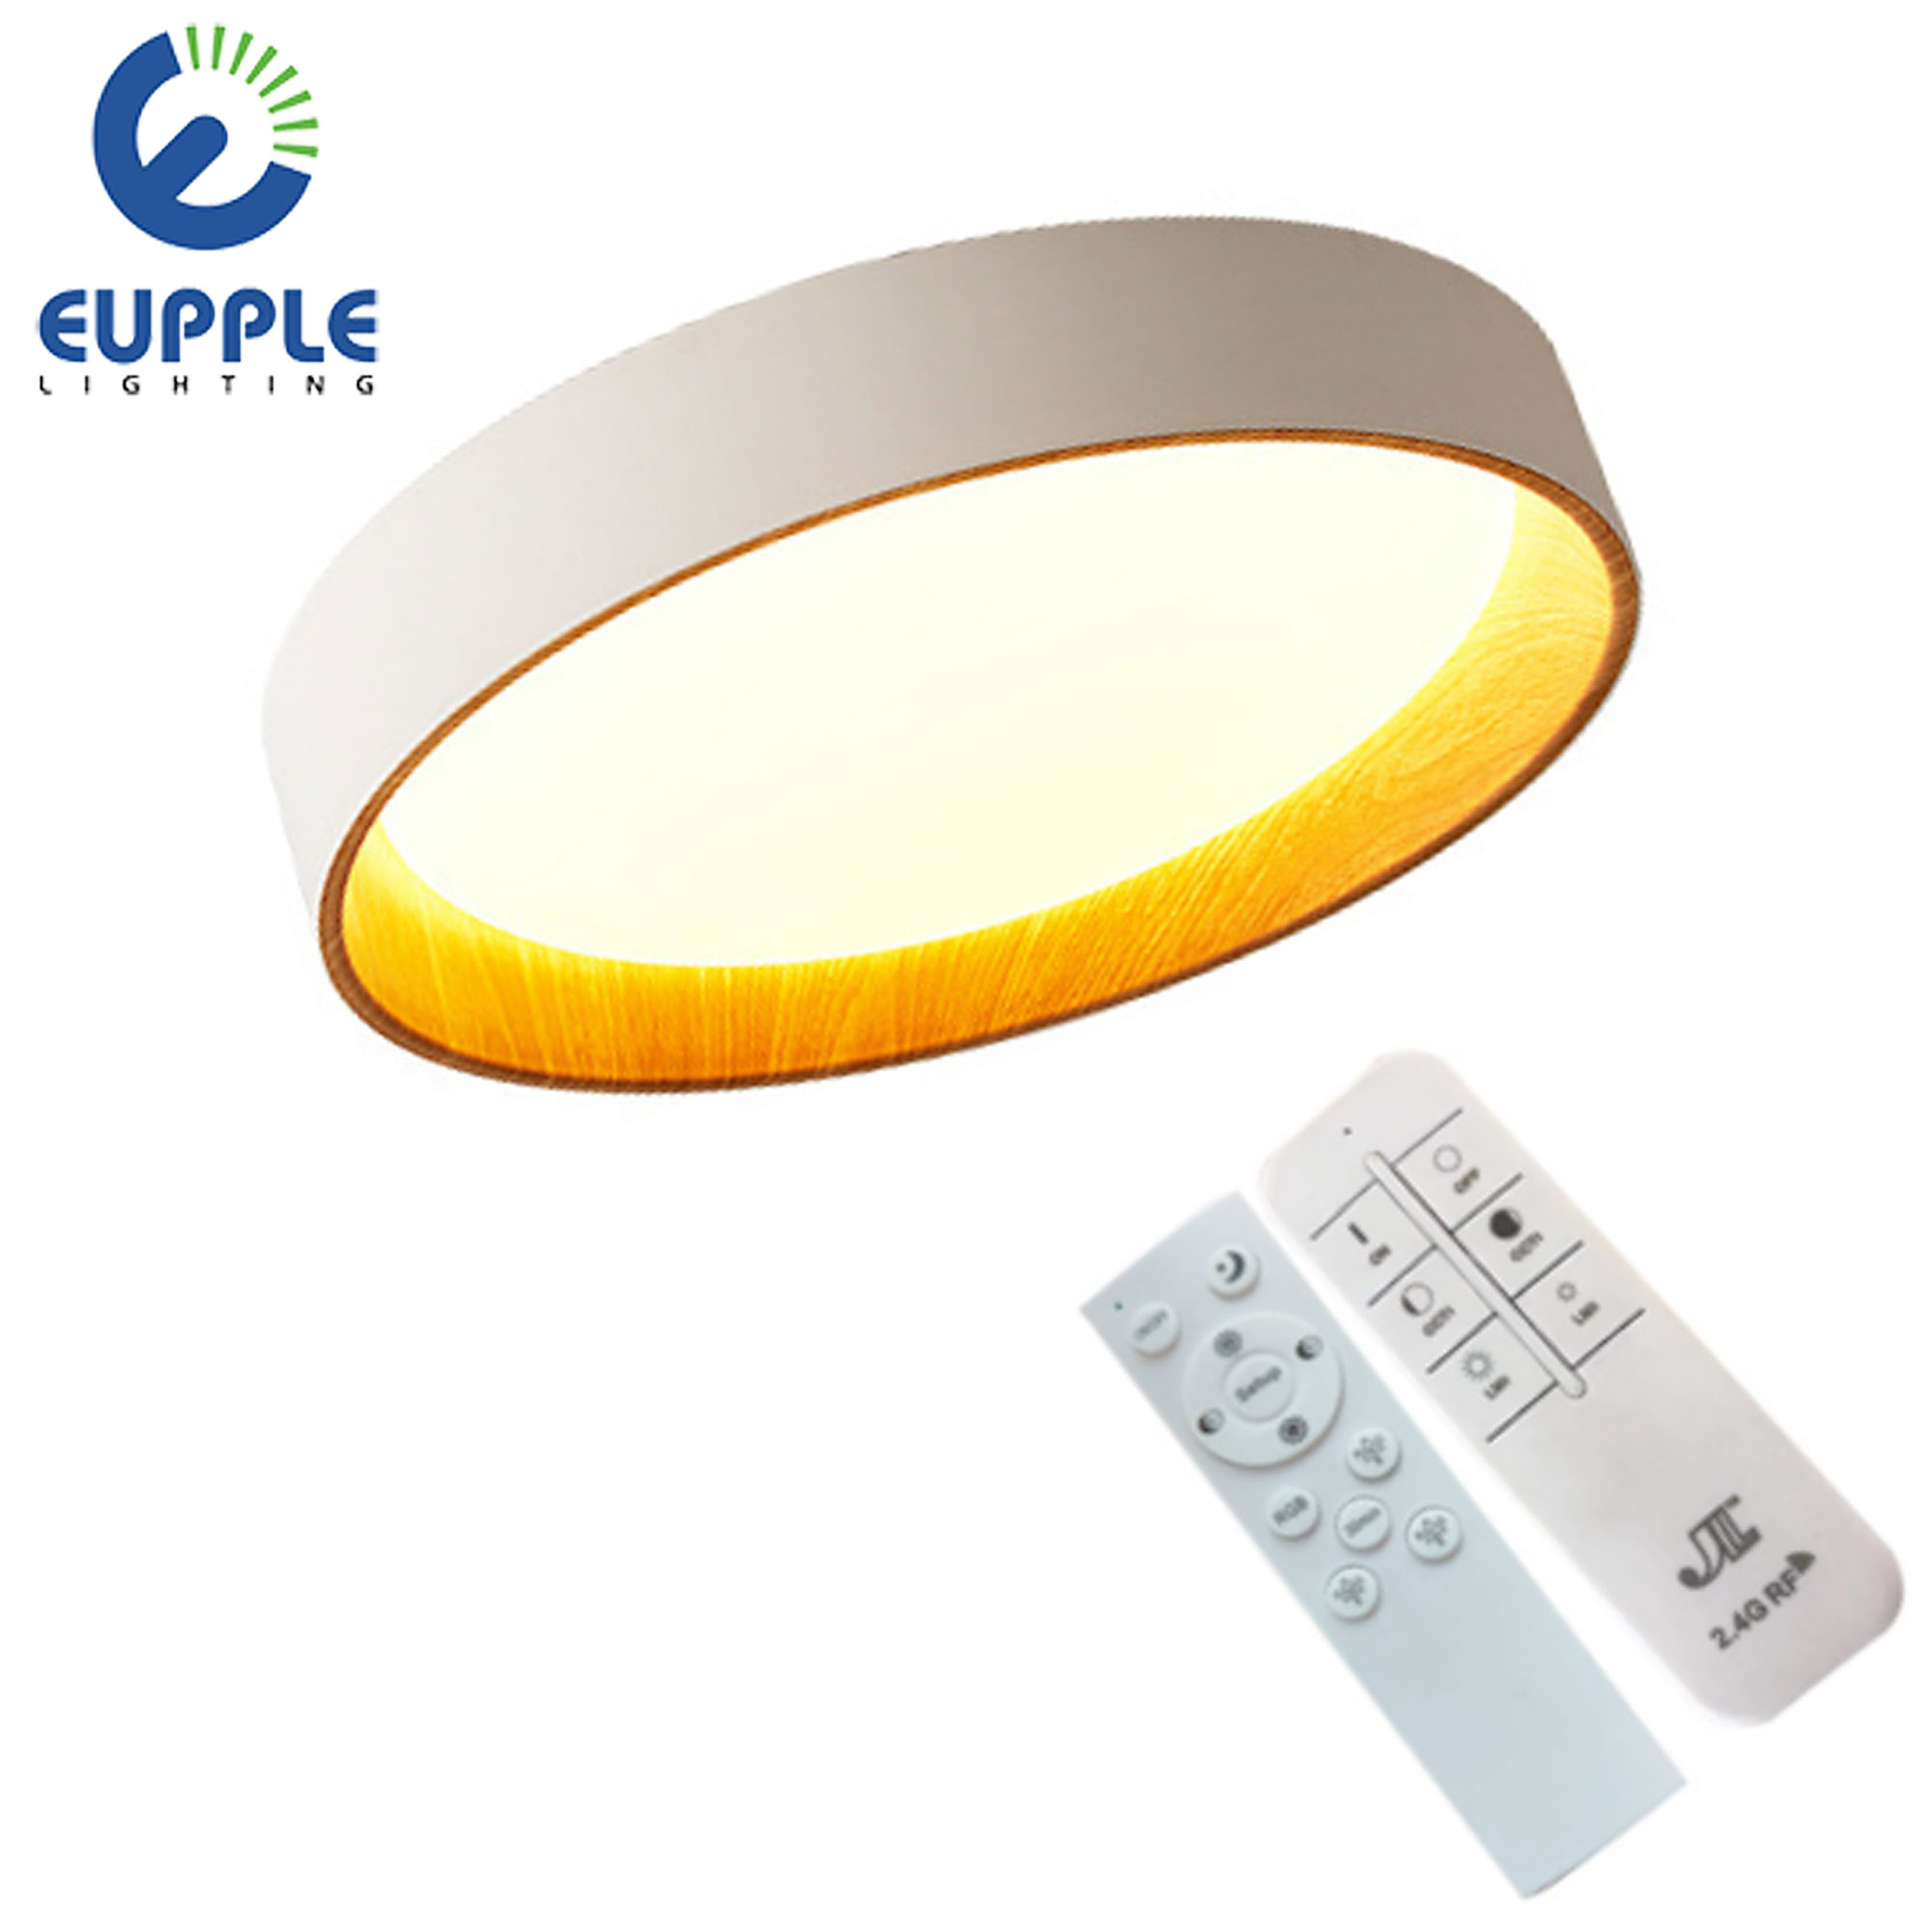 led multi color light with remote control,LED ceiling light with remote controller,remote controller led ceiling light,SAA,CE,CB TUV,